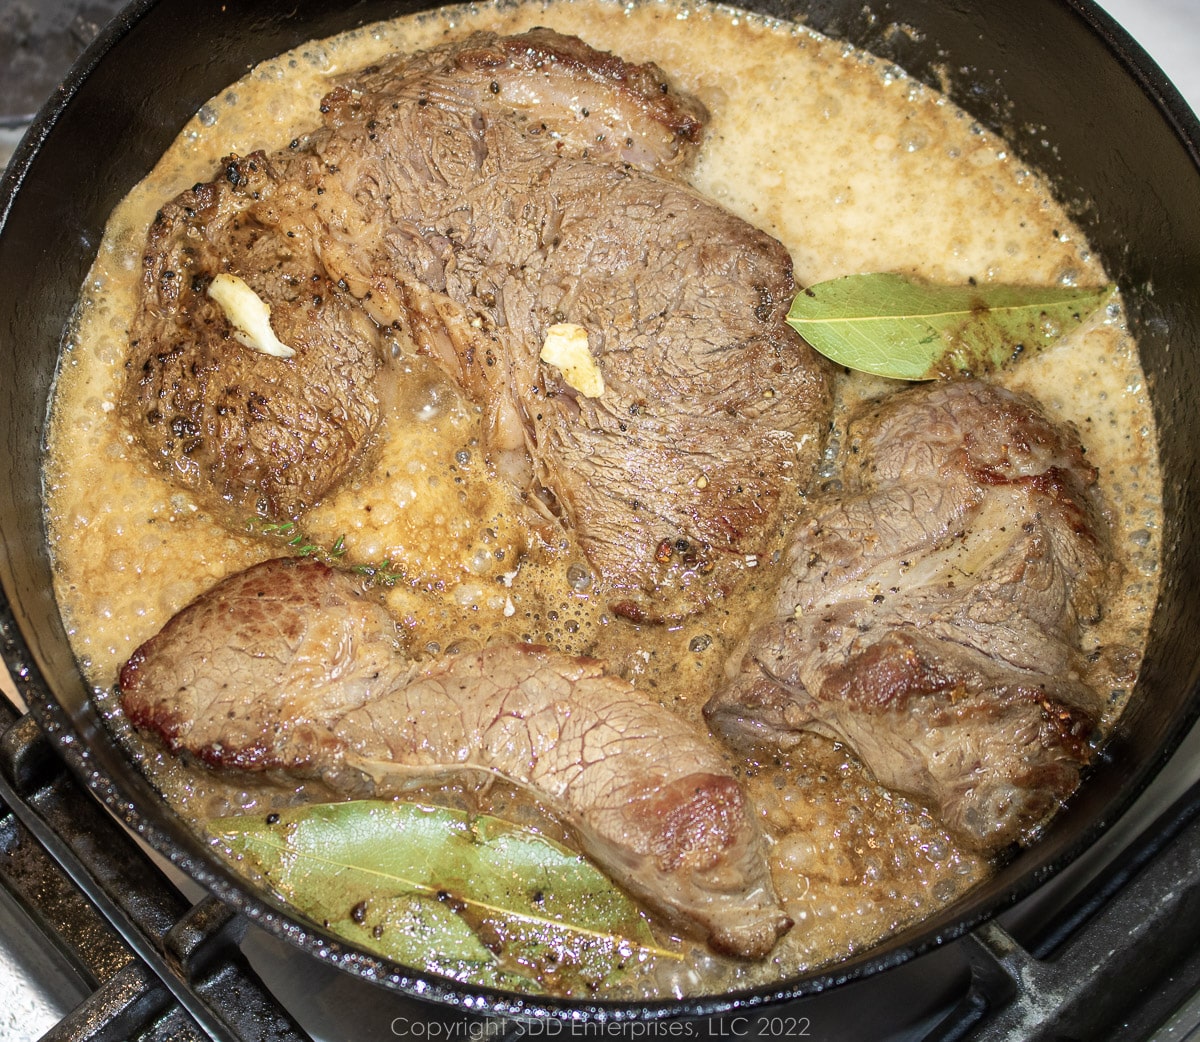 beer being added for a braise of beef chuck roast in a Dutch oven